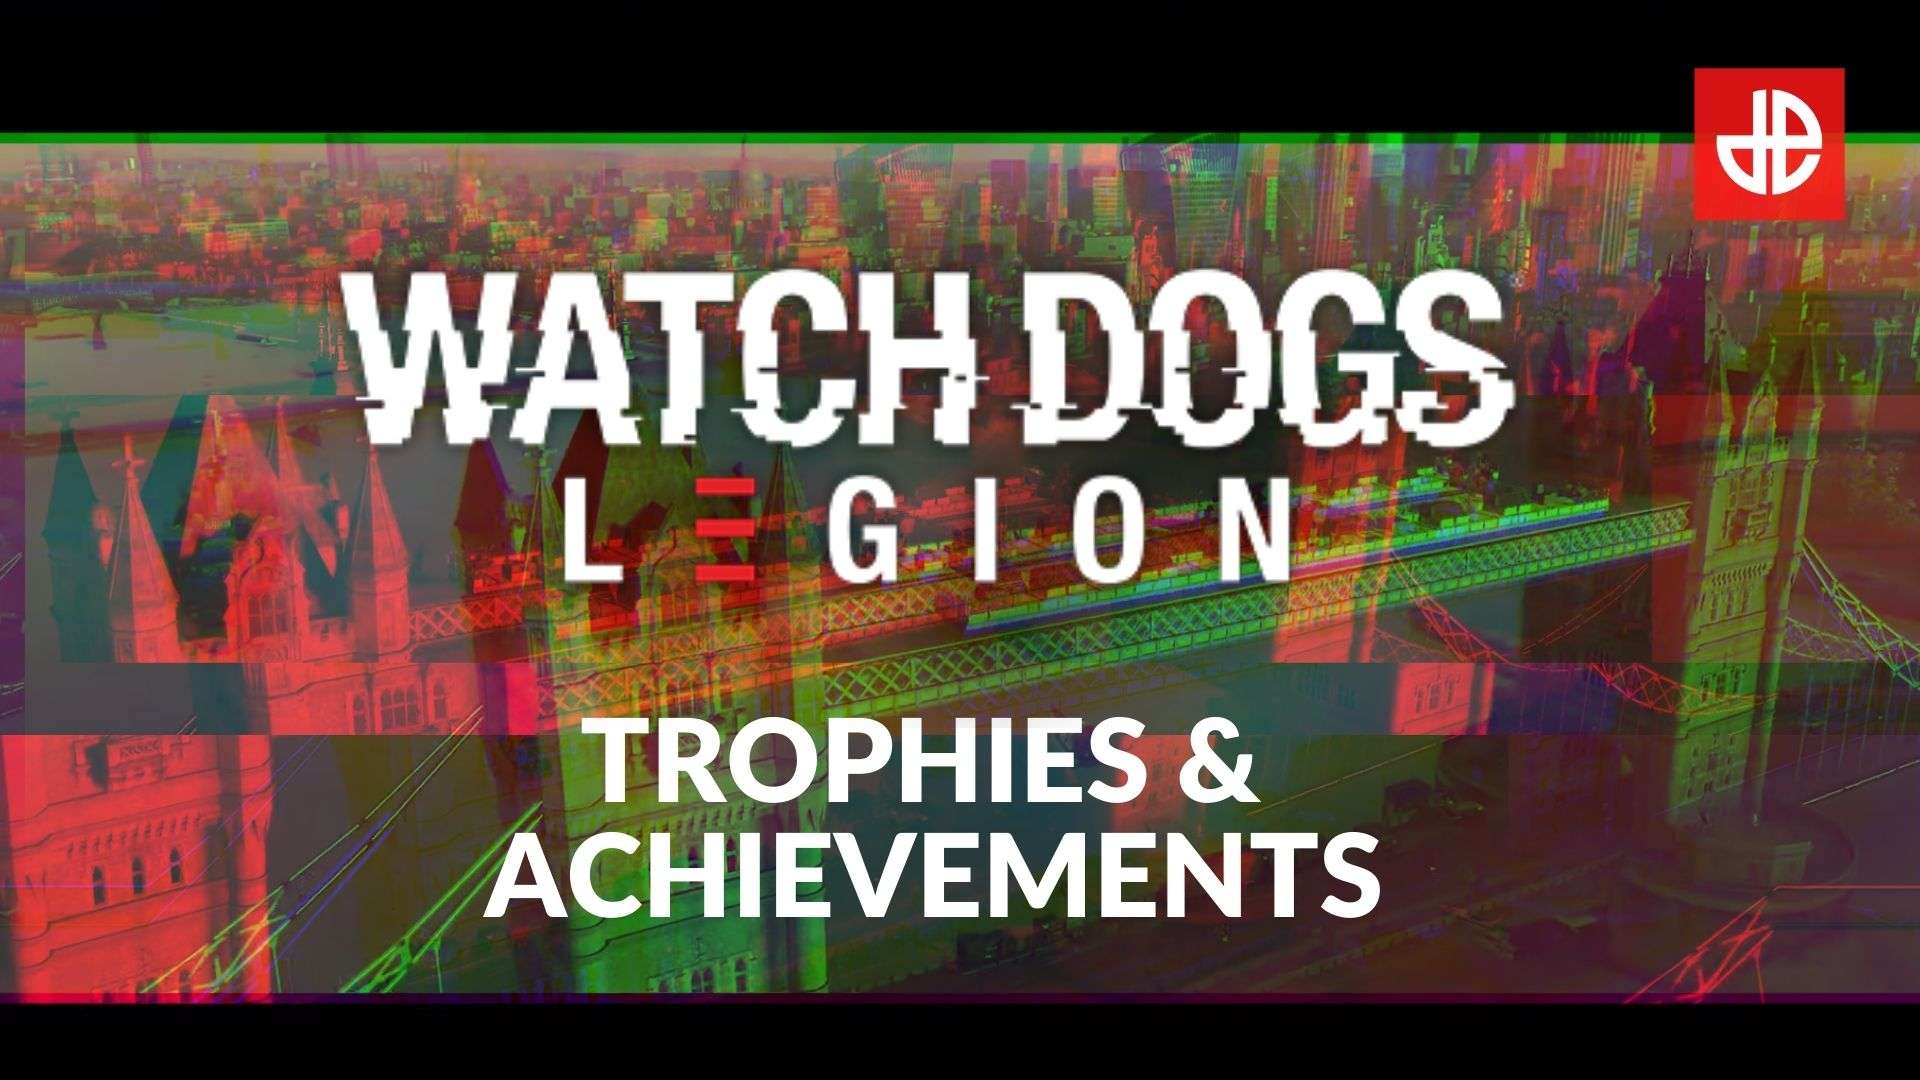 Text advertising trophies and achievements for Watch Dogs Legion